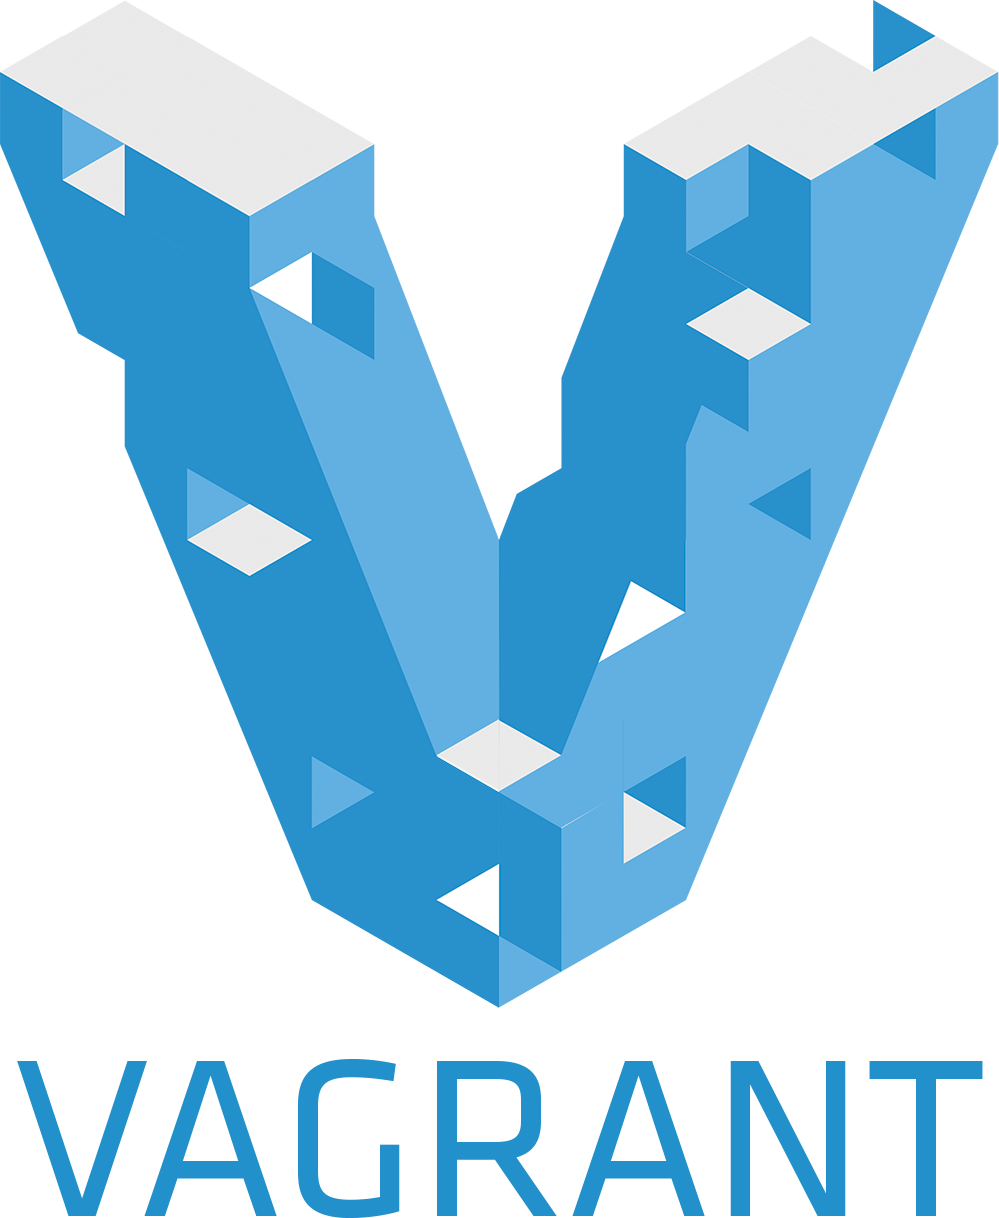 Putting Vagrant into practice: our experience